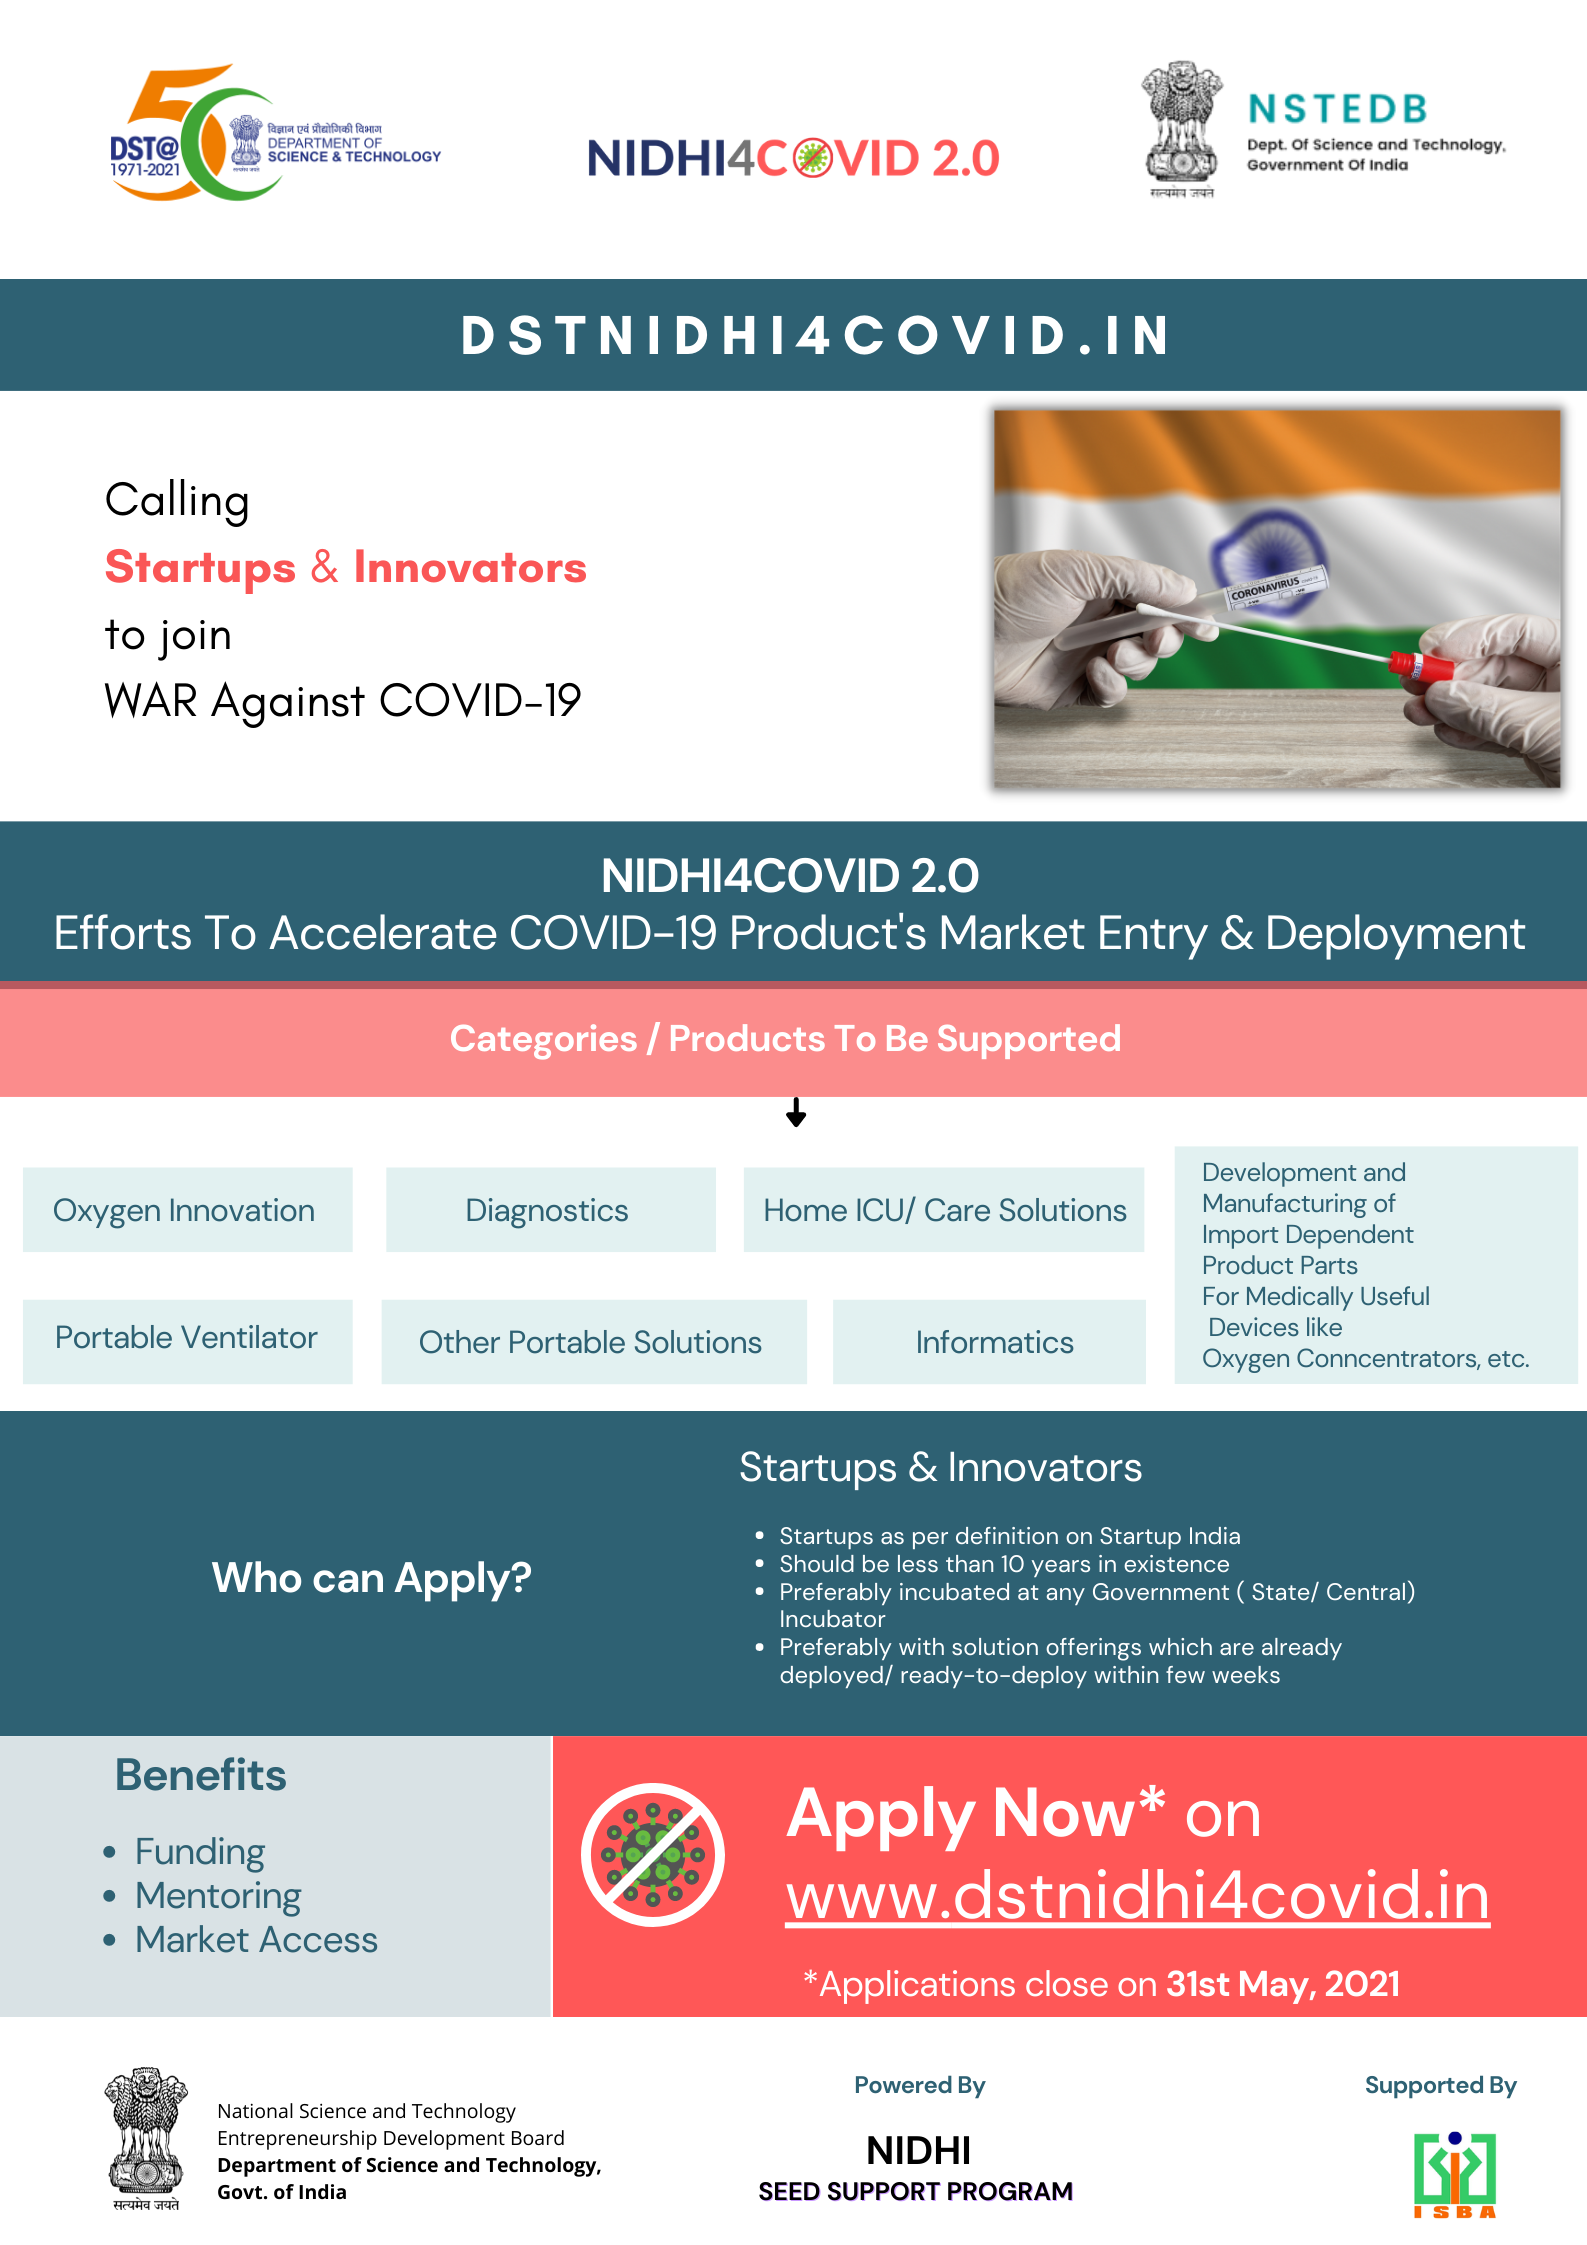 DST CALLING PROMISING STARTUPS TO BE THE PART OF NIDHI4COVID 2.0 INITIATIVE